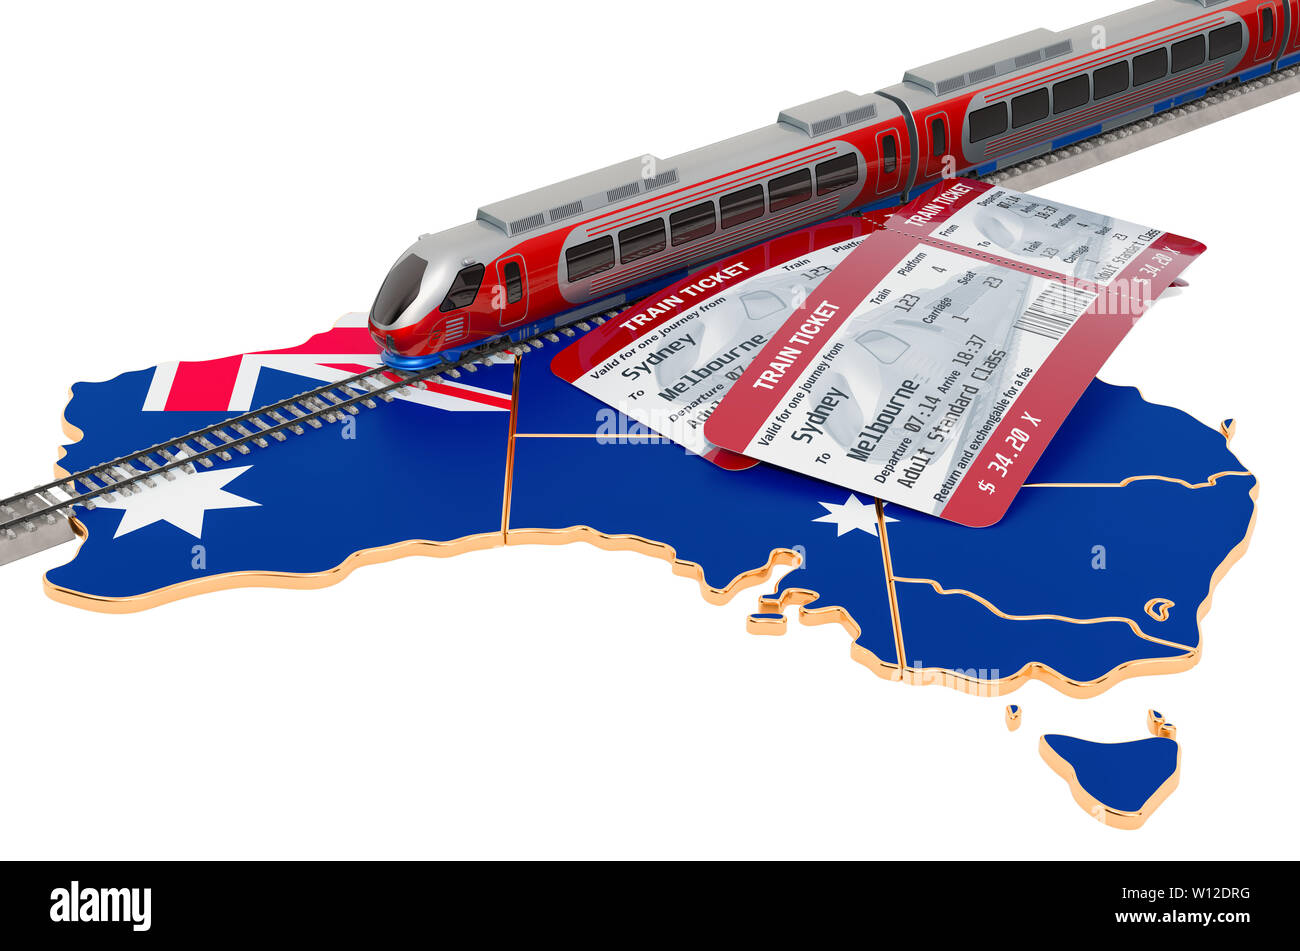 Train travel in Australia, concept. 3D rendering isolated on white background Stock Photo